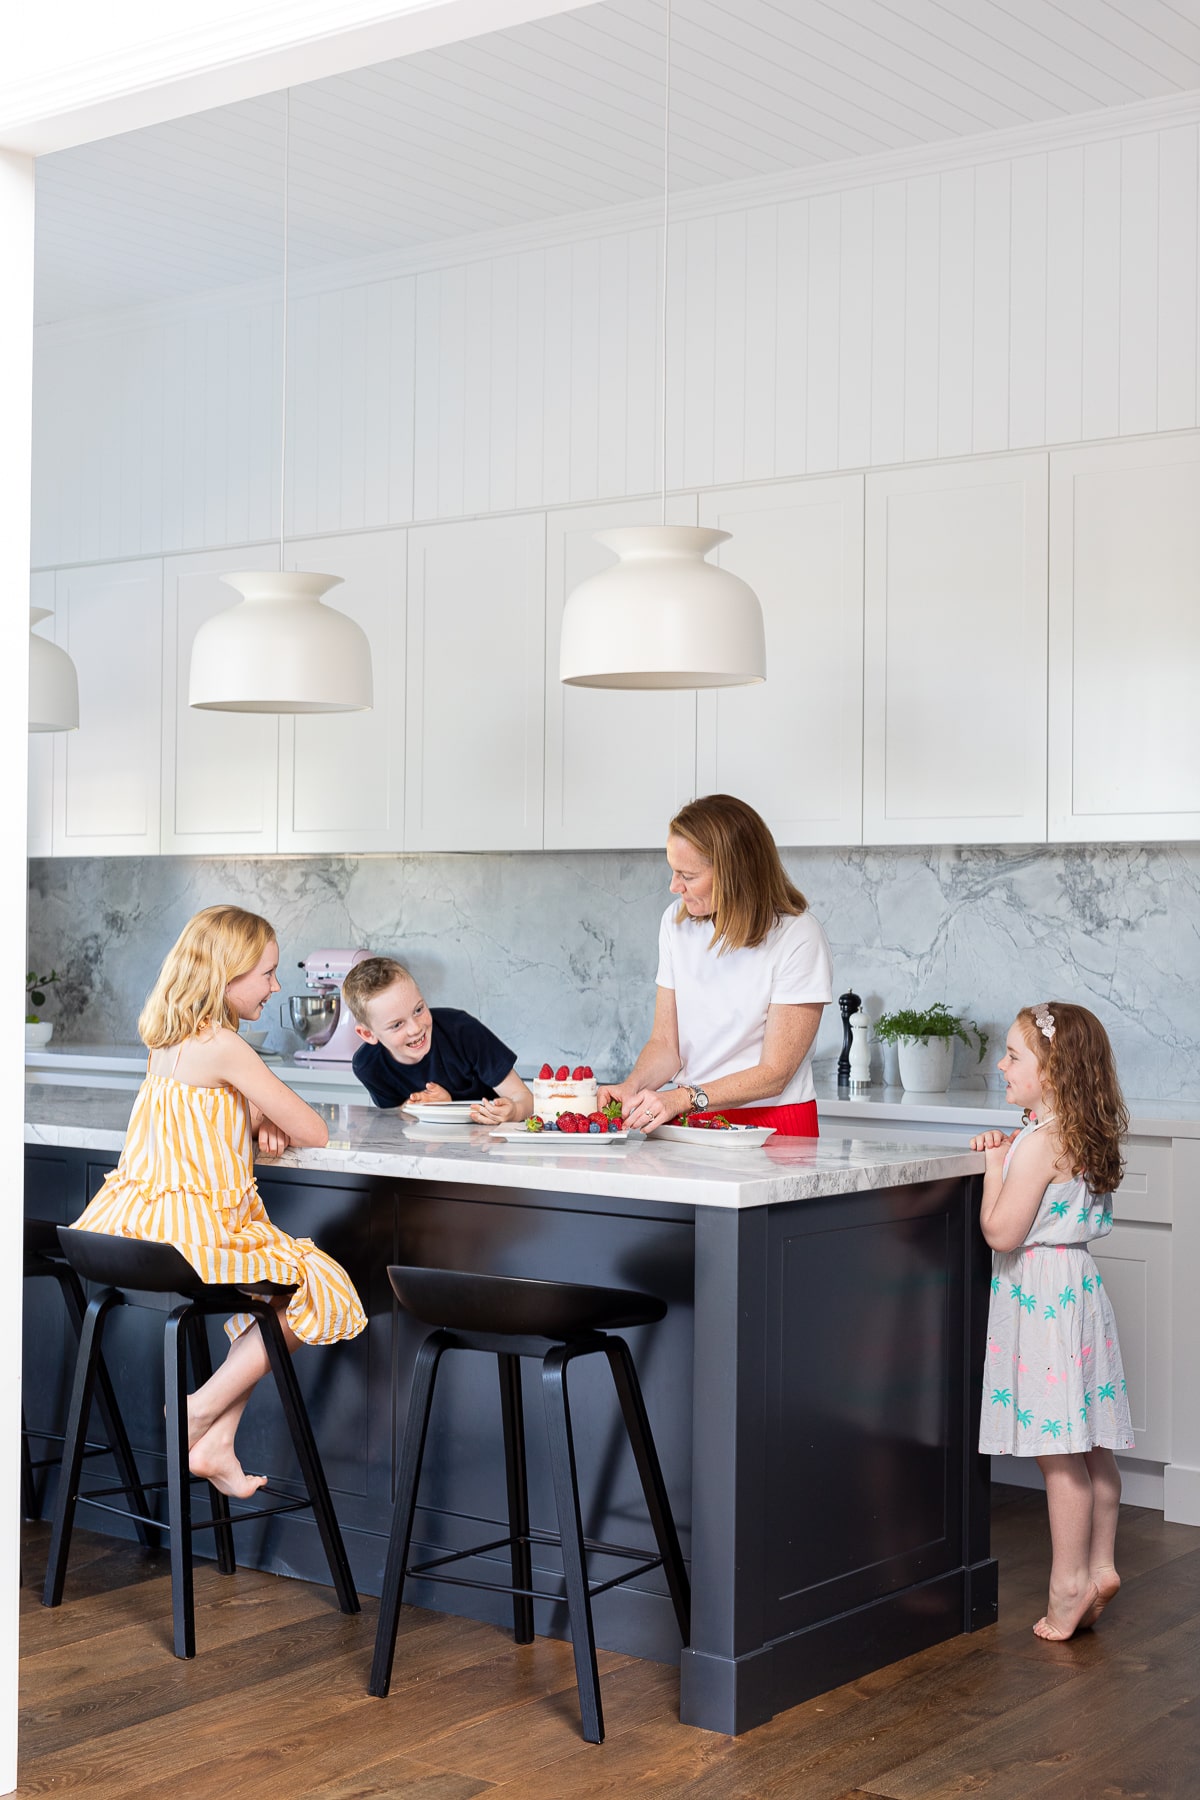 A woman and three young children gather around a black kitchen island as she serves cake and strawberries